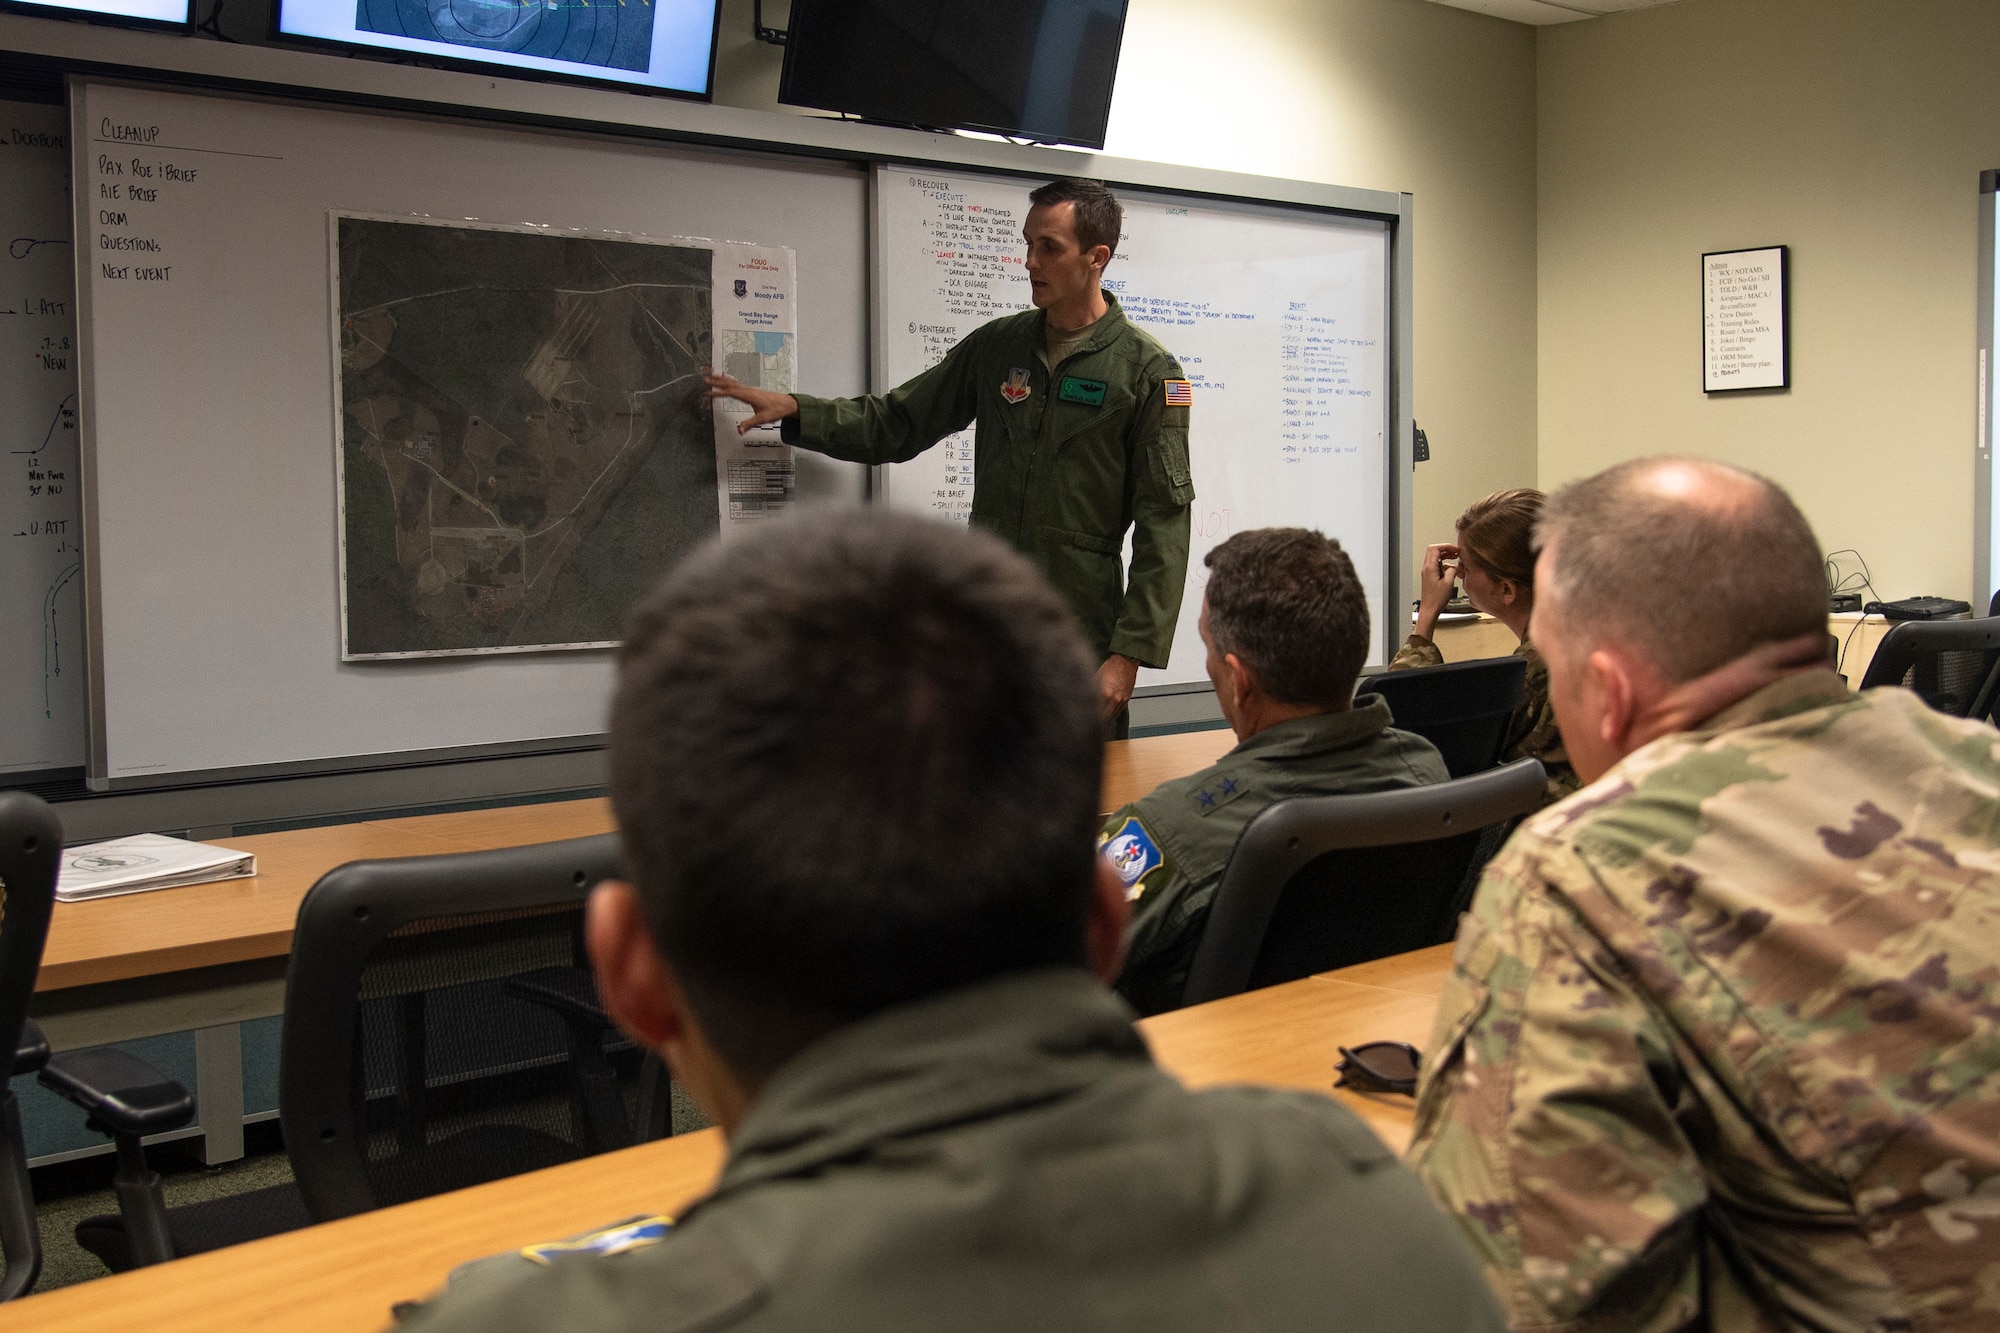 U.S. Air Force Capt. Christopher Allen, 41st Rescue Squadron (RQS) flight commander, briefs Ninth Air Force leadership before a flight at Moody Air Force Base, Ga., Aug. 8, 2019. U.S. Air Force Maj. Gen. Chad Franks, Ninth Air Force commander, flew the initial flight in his flagship aircraft, an HH-60G Pave Hawk assigned to the 41st RQS. Franks, who on separate occasions served as the commander for the 23d Wing and 347th Rescue Group, is a command pilot with more than 3,300 hours in multiple aircraft including HC-130J Combat King II and HH-60G Pave Hawk. (U.S. Air Force photo by Airman 1st Class Taryn Butler)